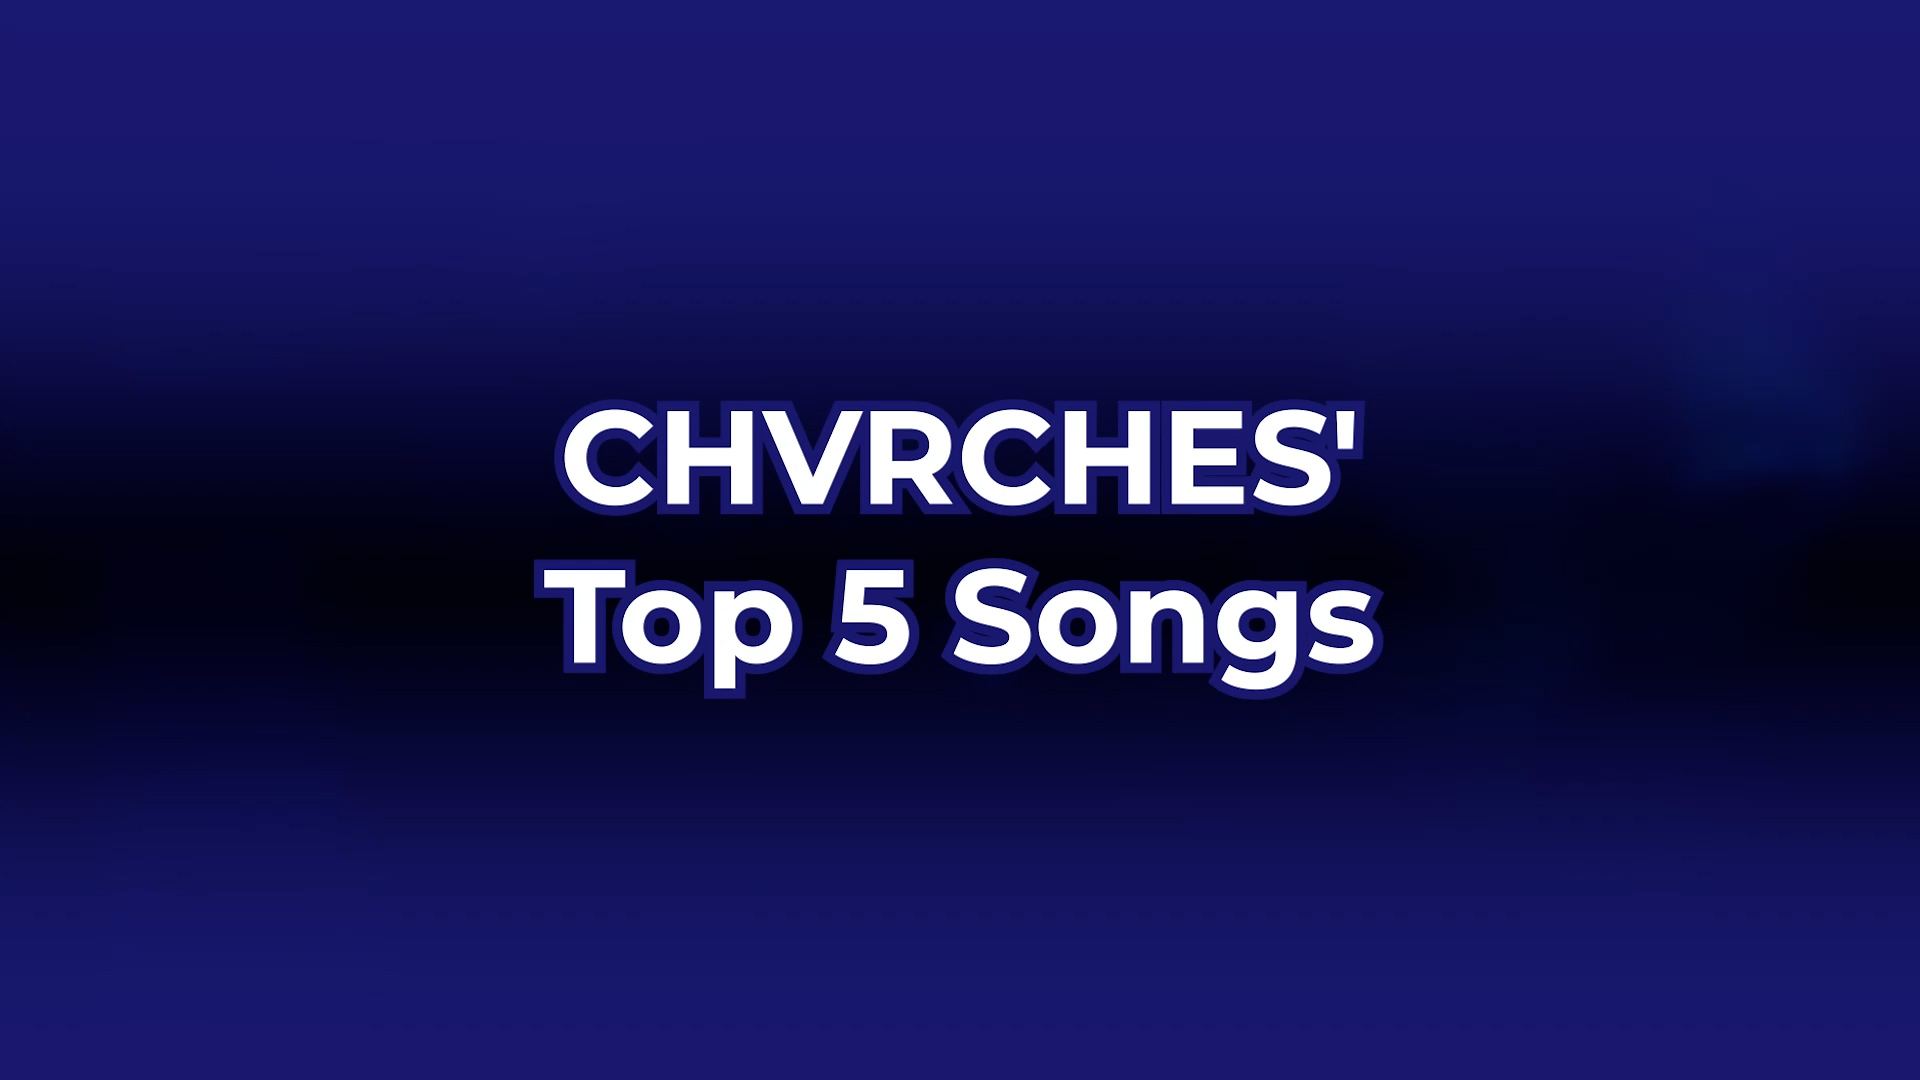 CHVRCHES' Top 5 Songs